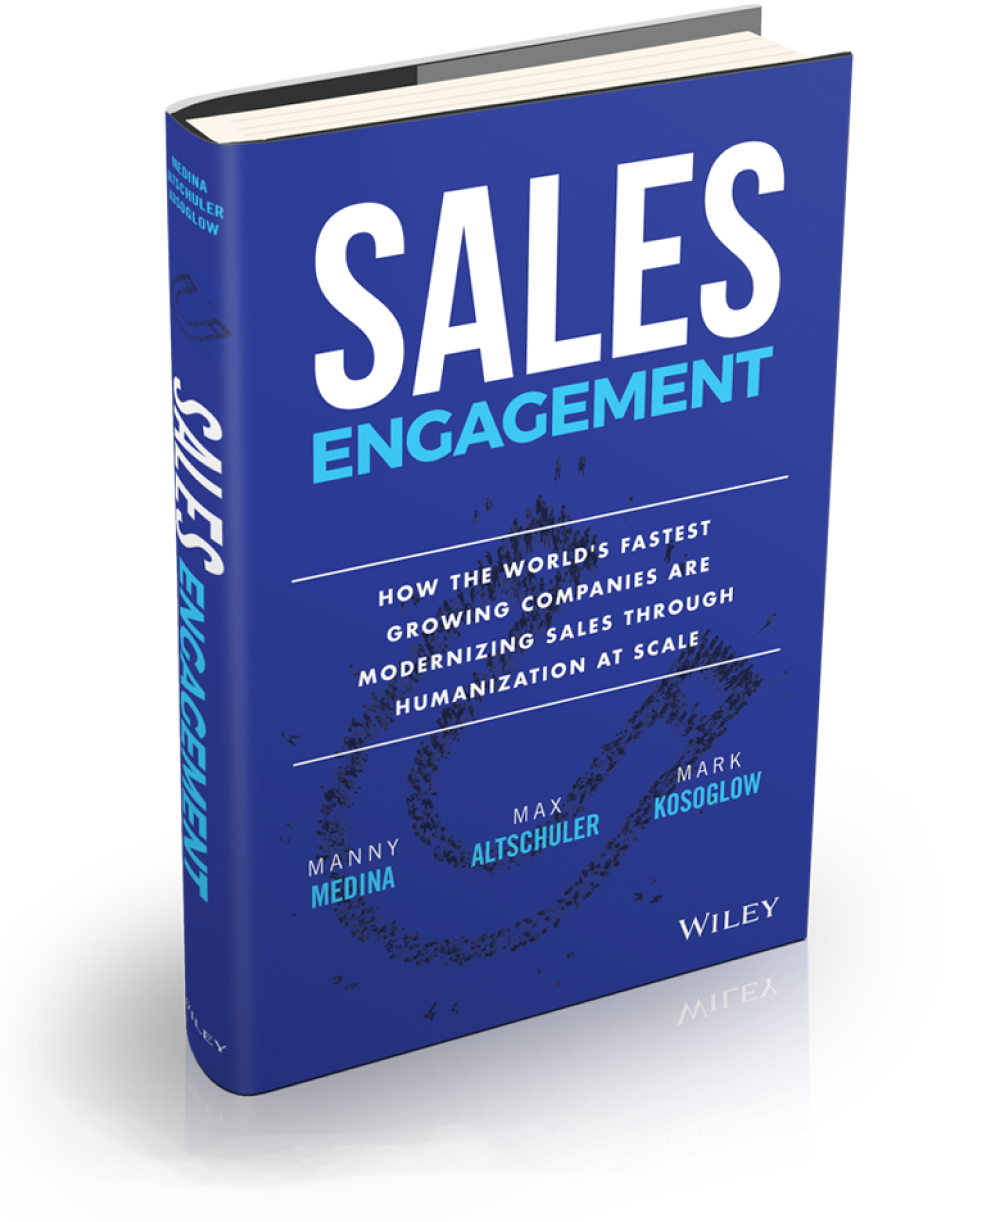 Photo of the Sales Engagement book